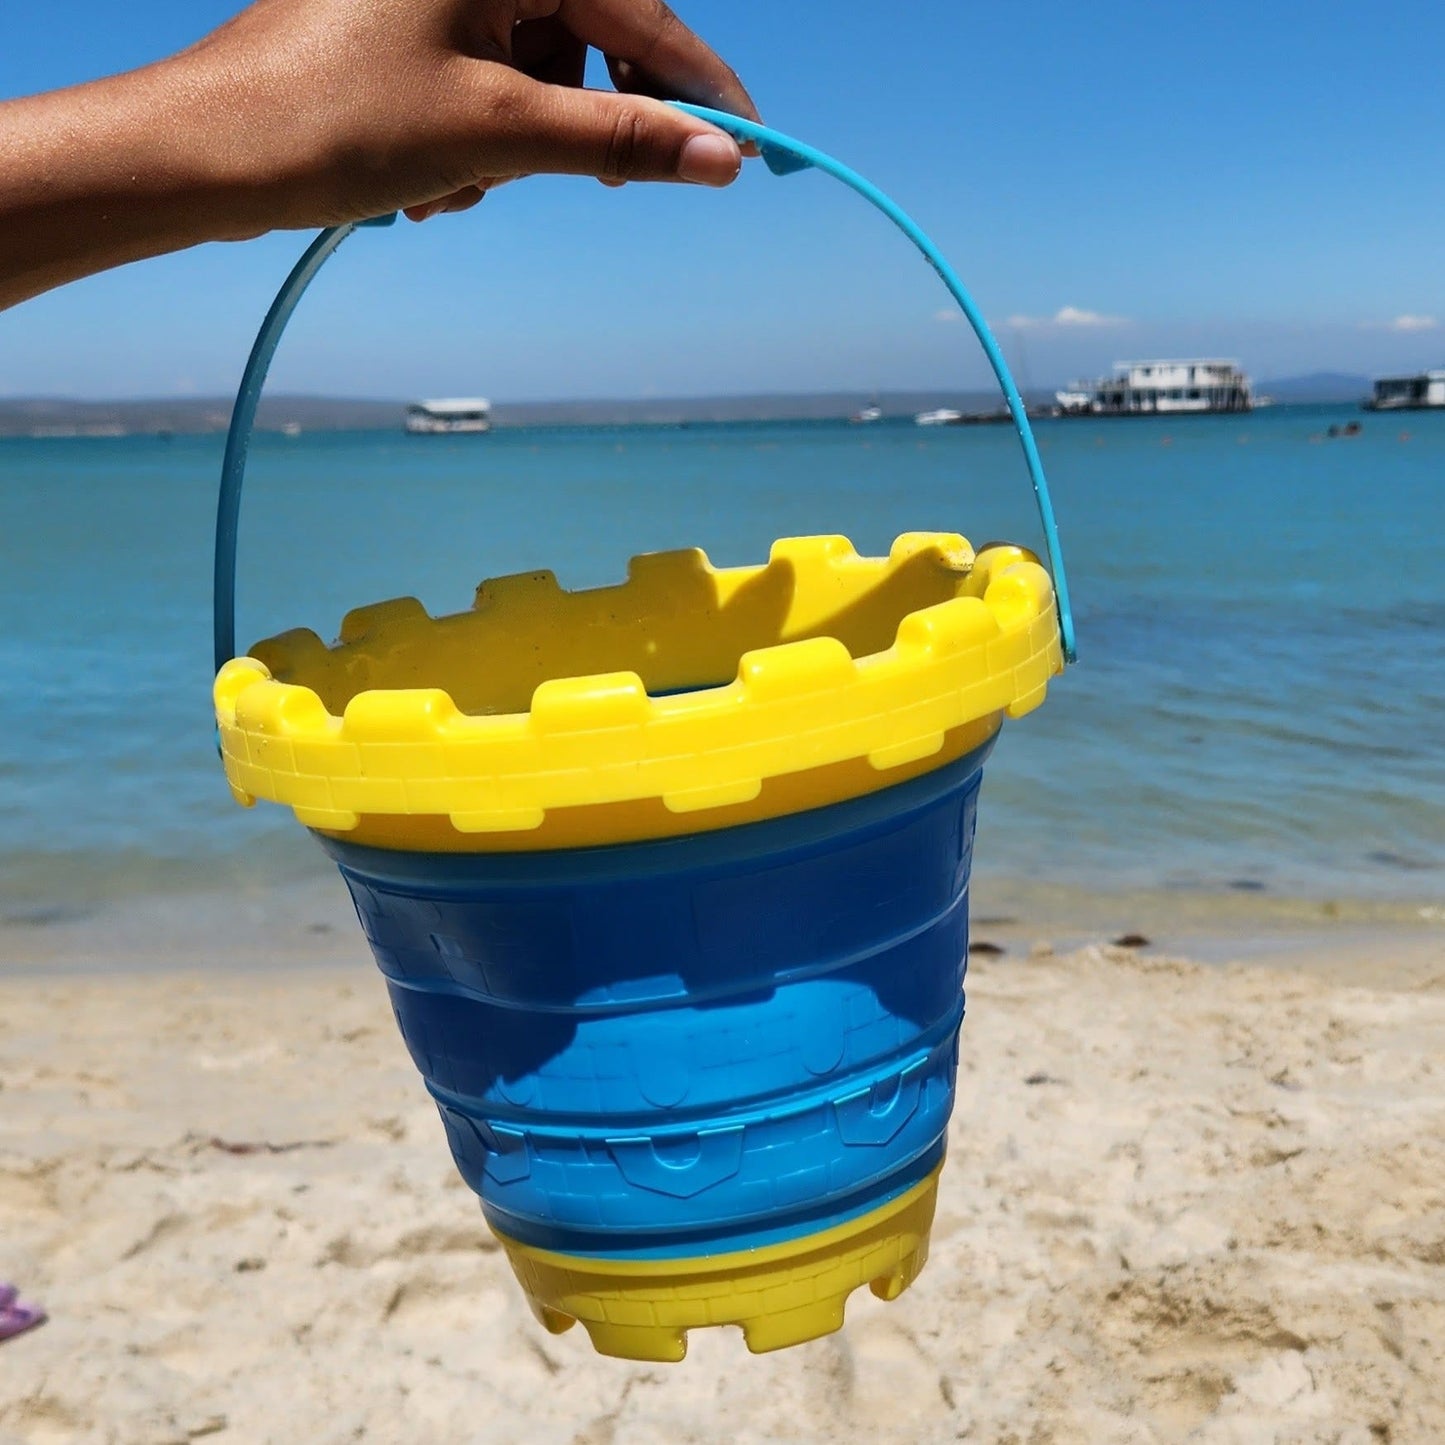 Our Collapsible Beach Bucket